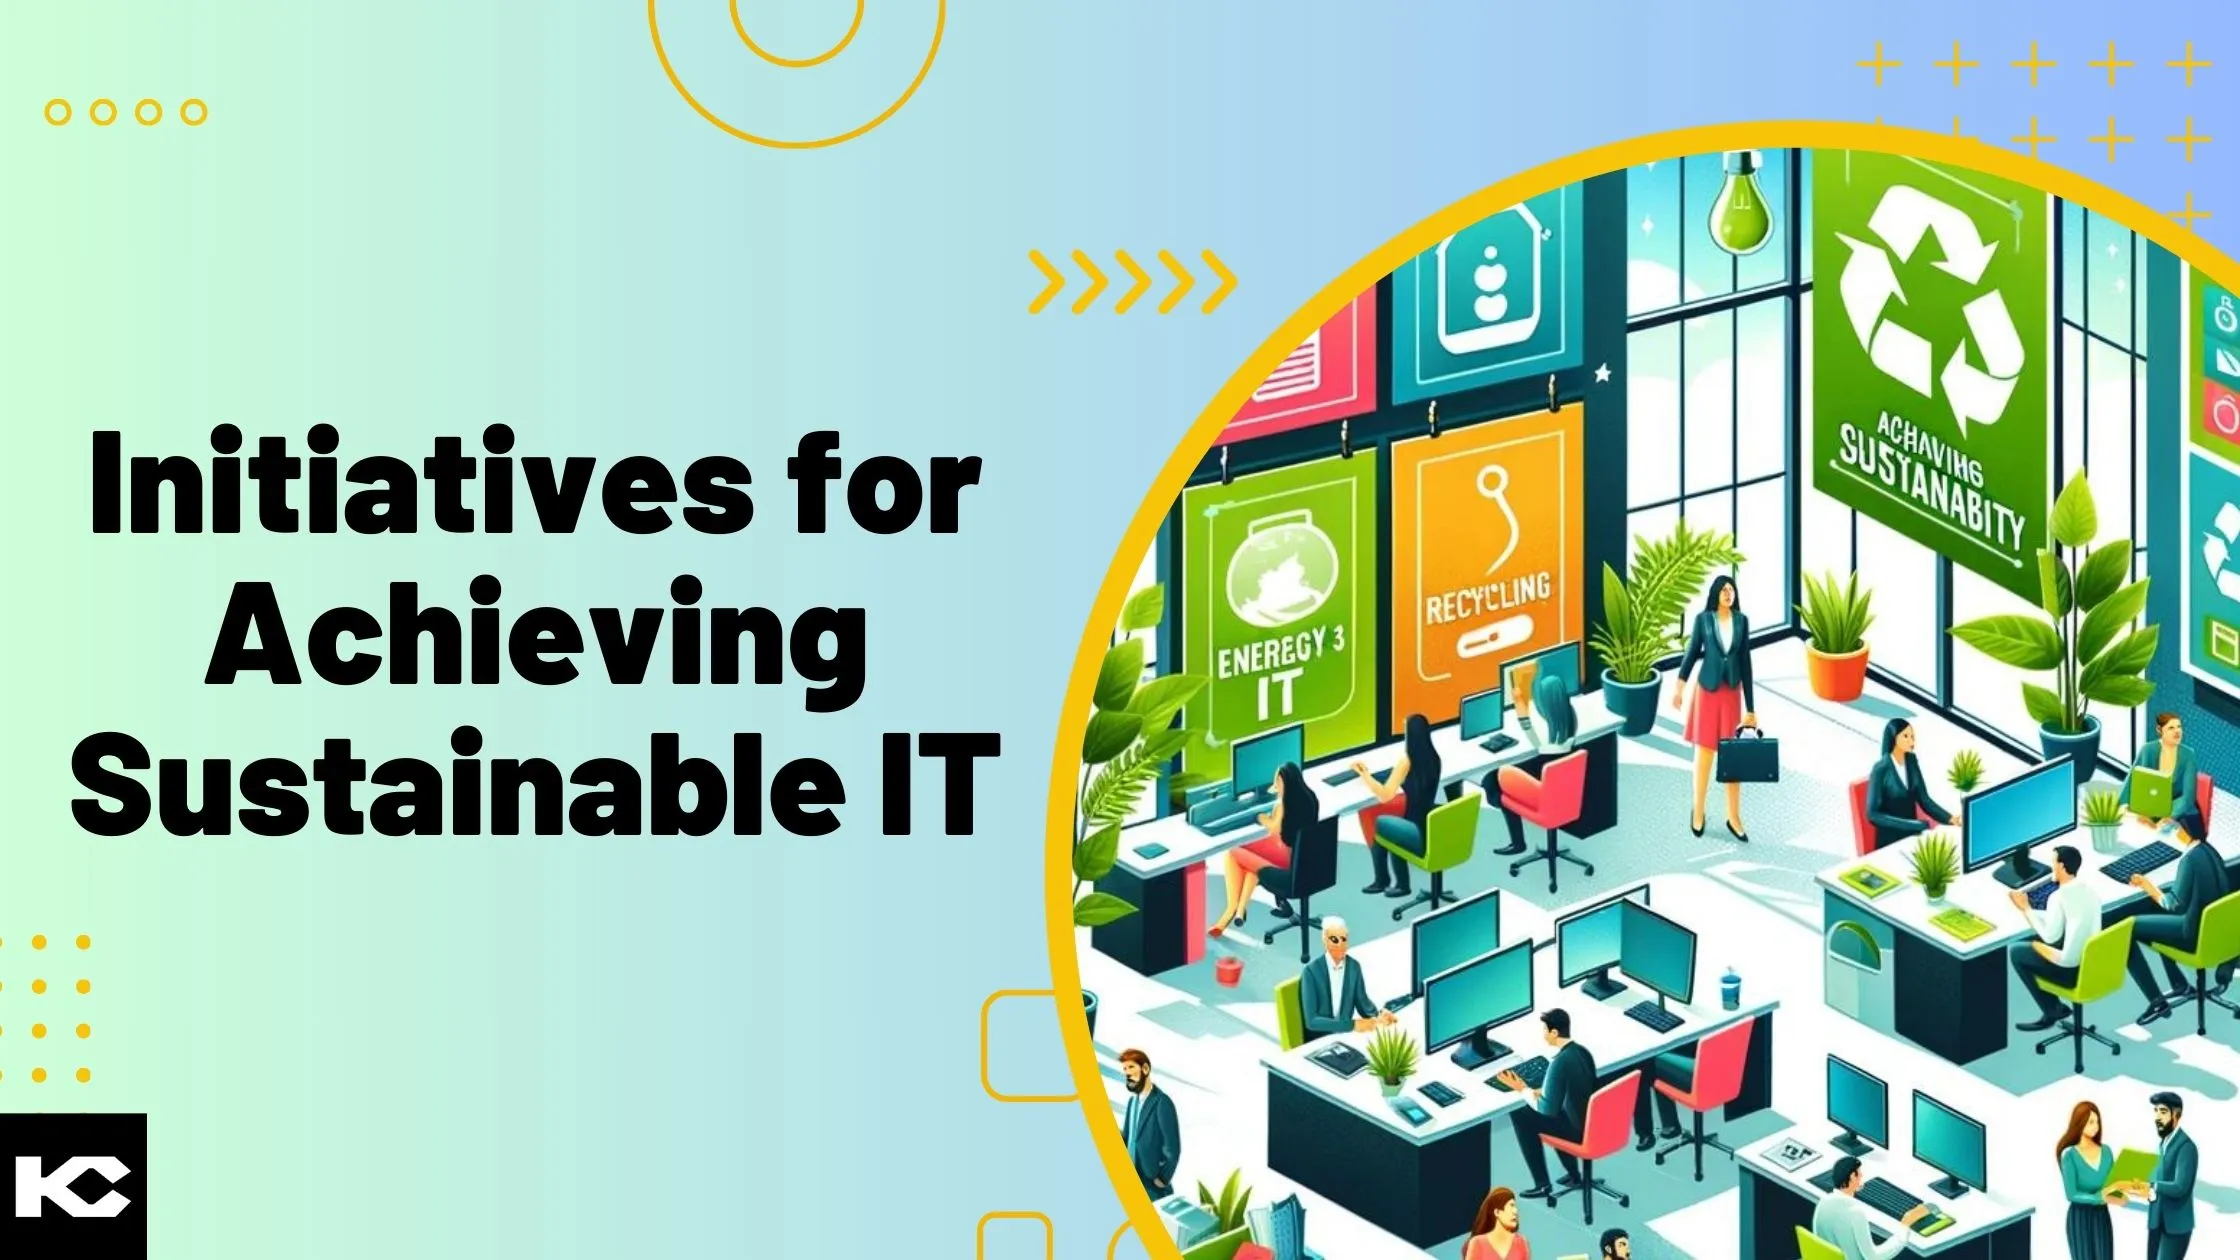 Initiatives for Achieving Sustainable IT (Kizzy Consulting)